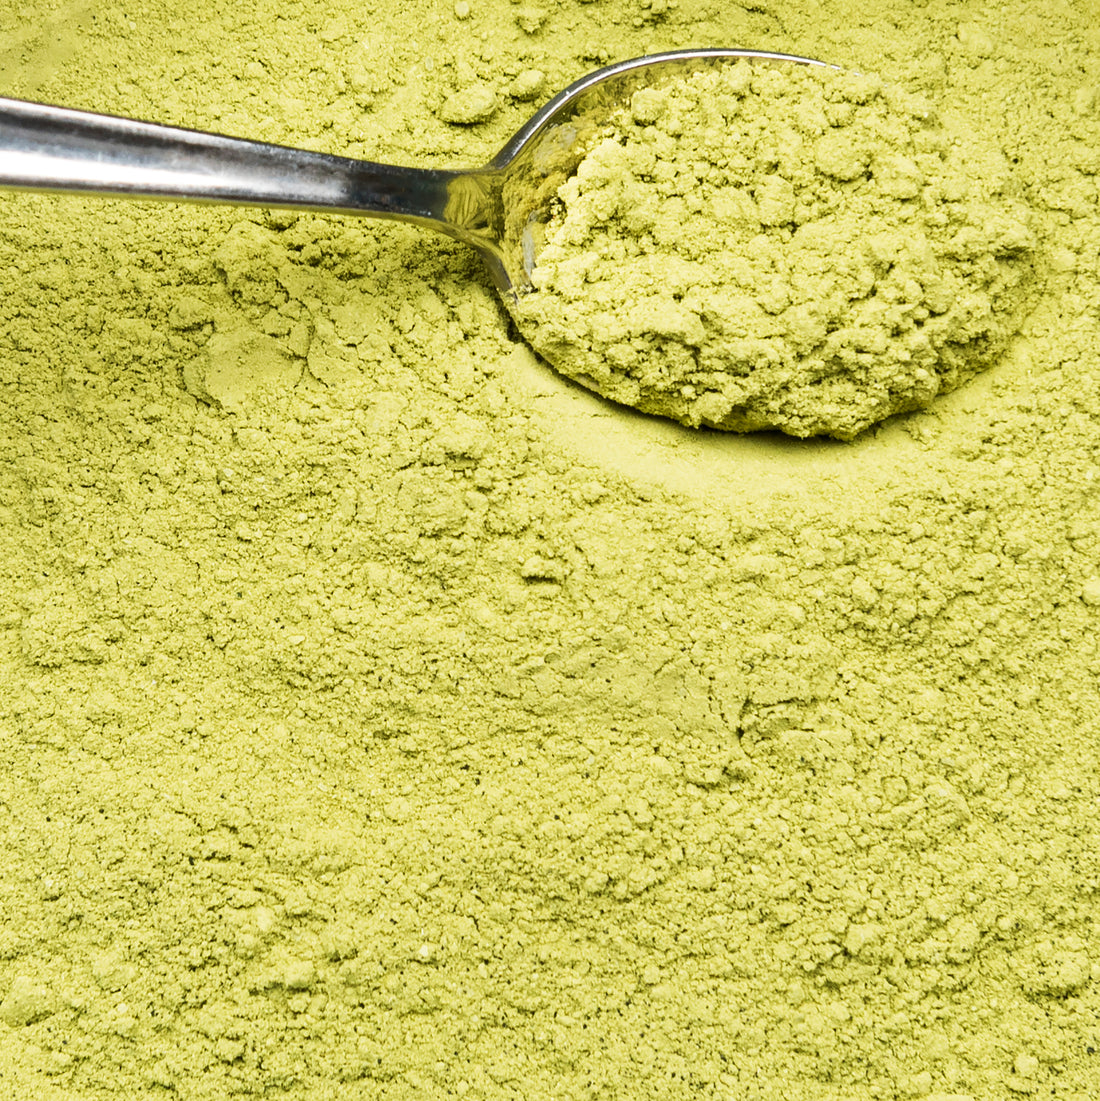 Health Benefits of Super Greens Powders Explained